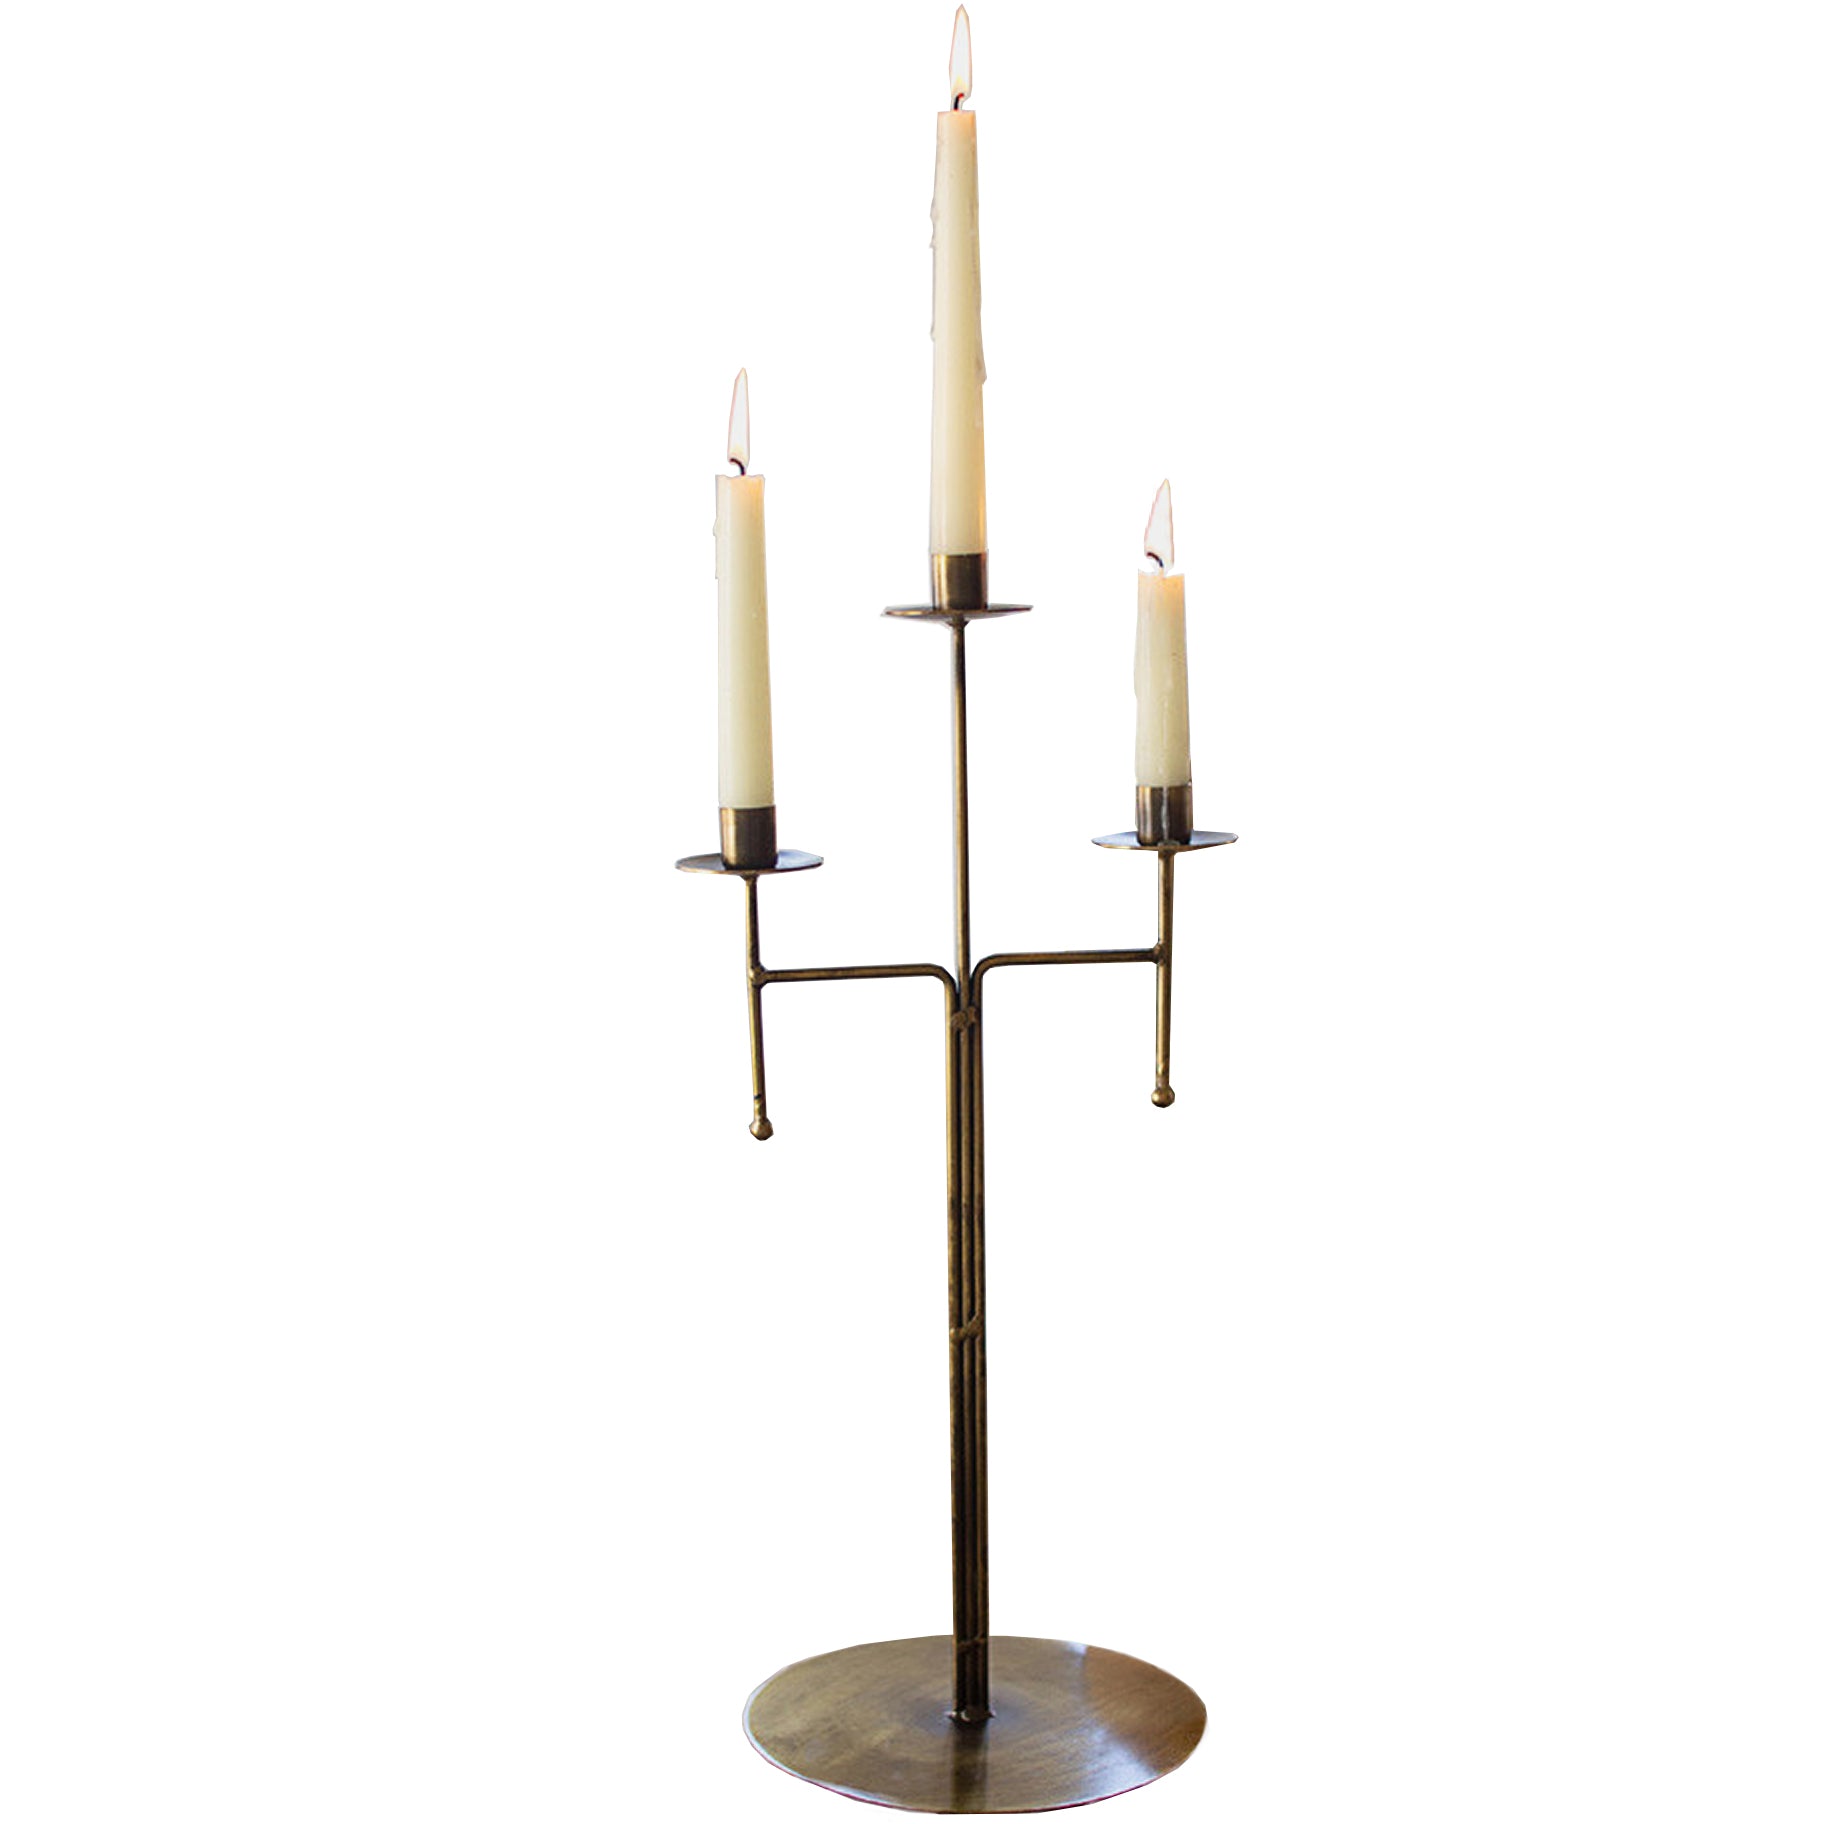 Antique Brass Tabletop Candelabra With Three Taper Candle Holders